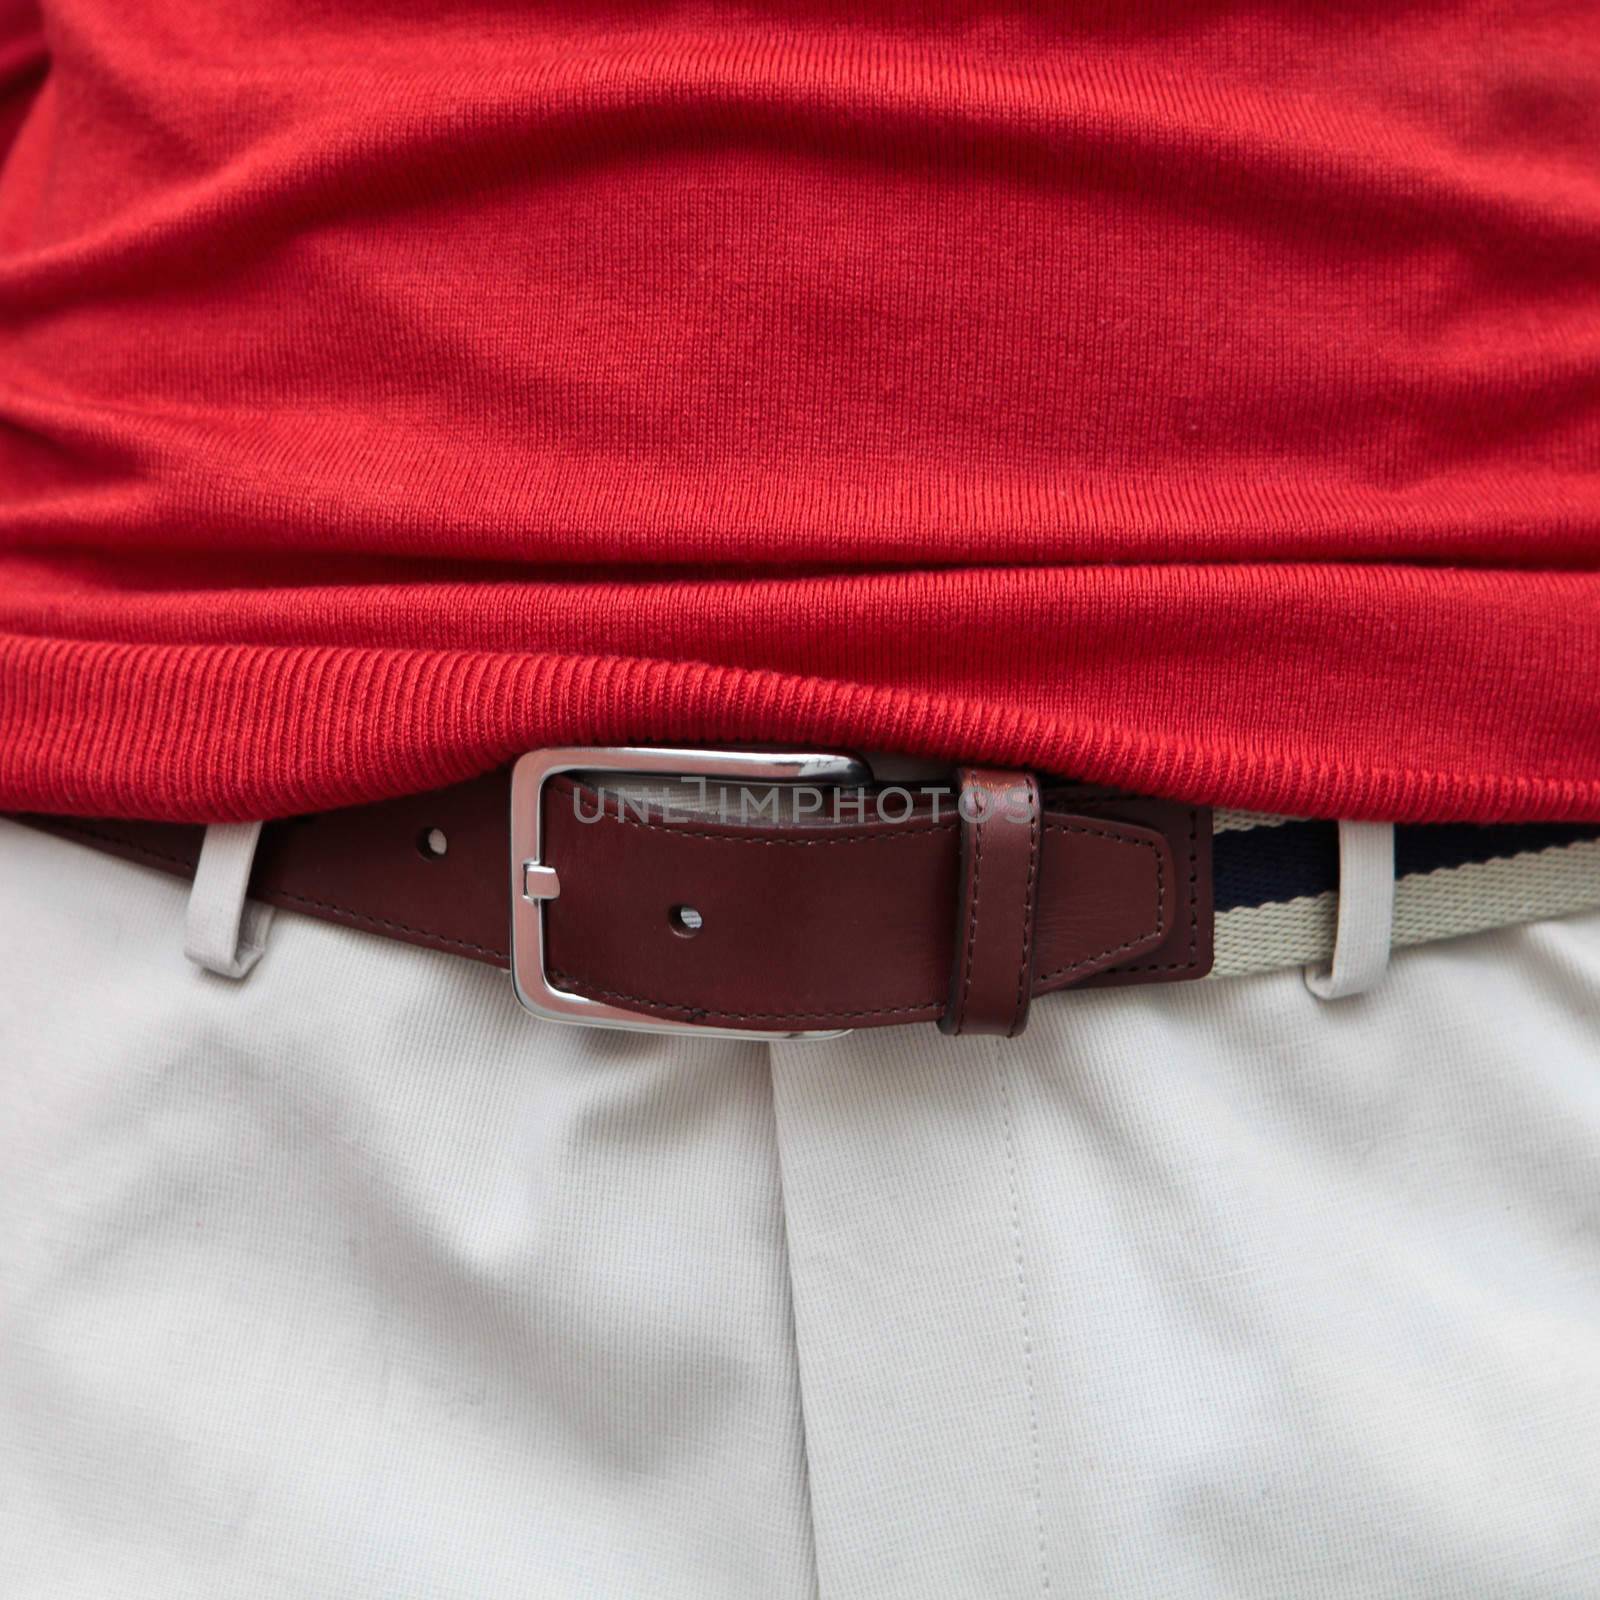 Belt, trousers and red jumper, smart casual fashion